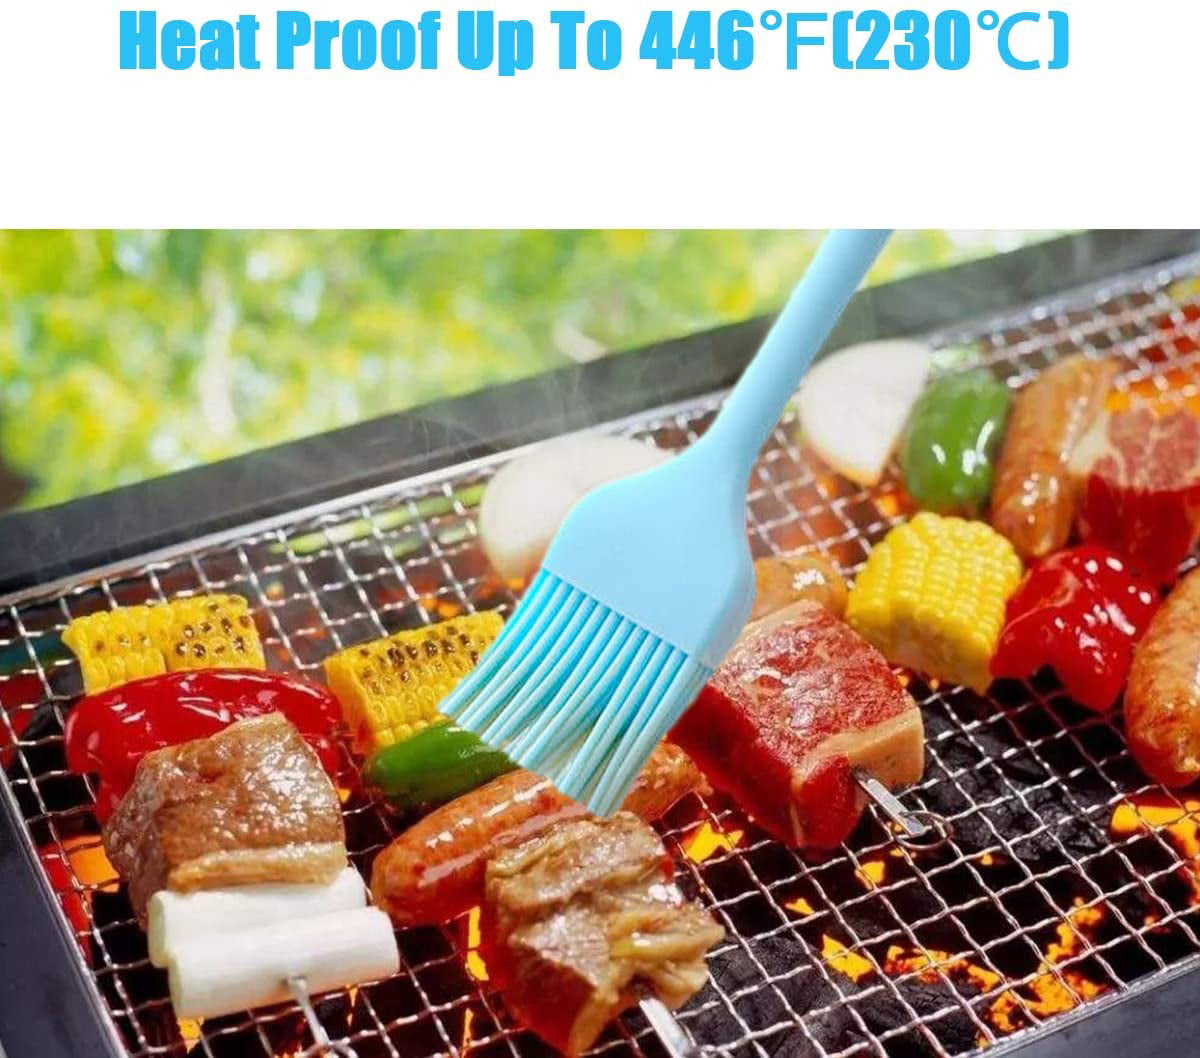 4 pack Basting Brushes Silicone Heat Resistant Pastry Brush Spread Oil Butter Sauce Marinades for BBQ Grill Barbecue Baking Kitchen Cooking Pastries Cakes Dessert Meat BPA Free Dishwasher Safe 